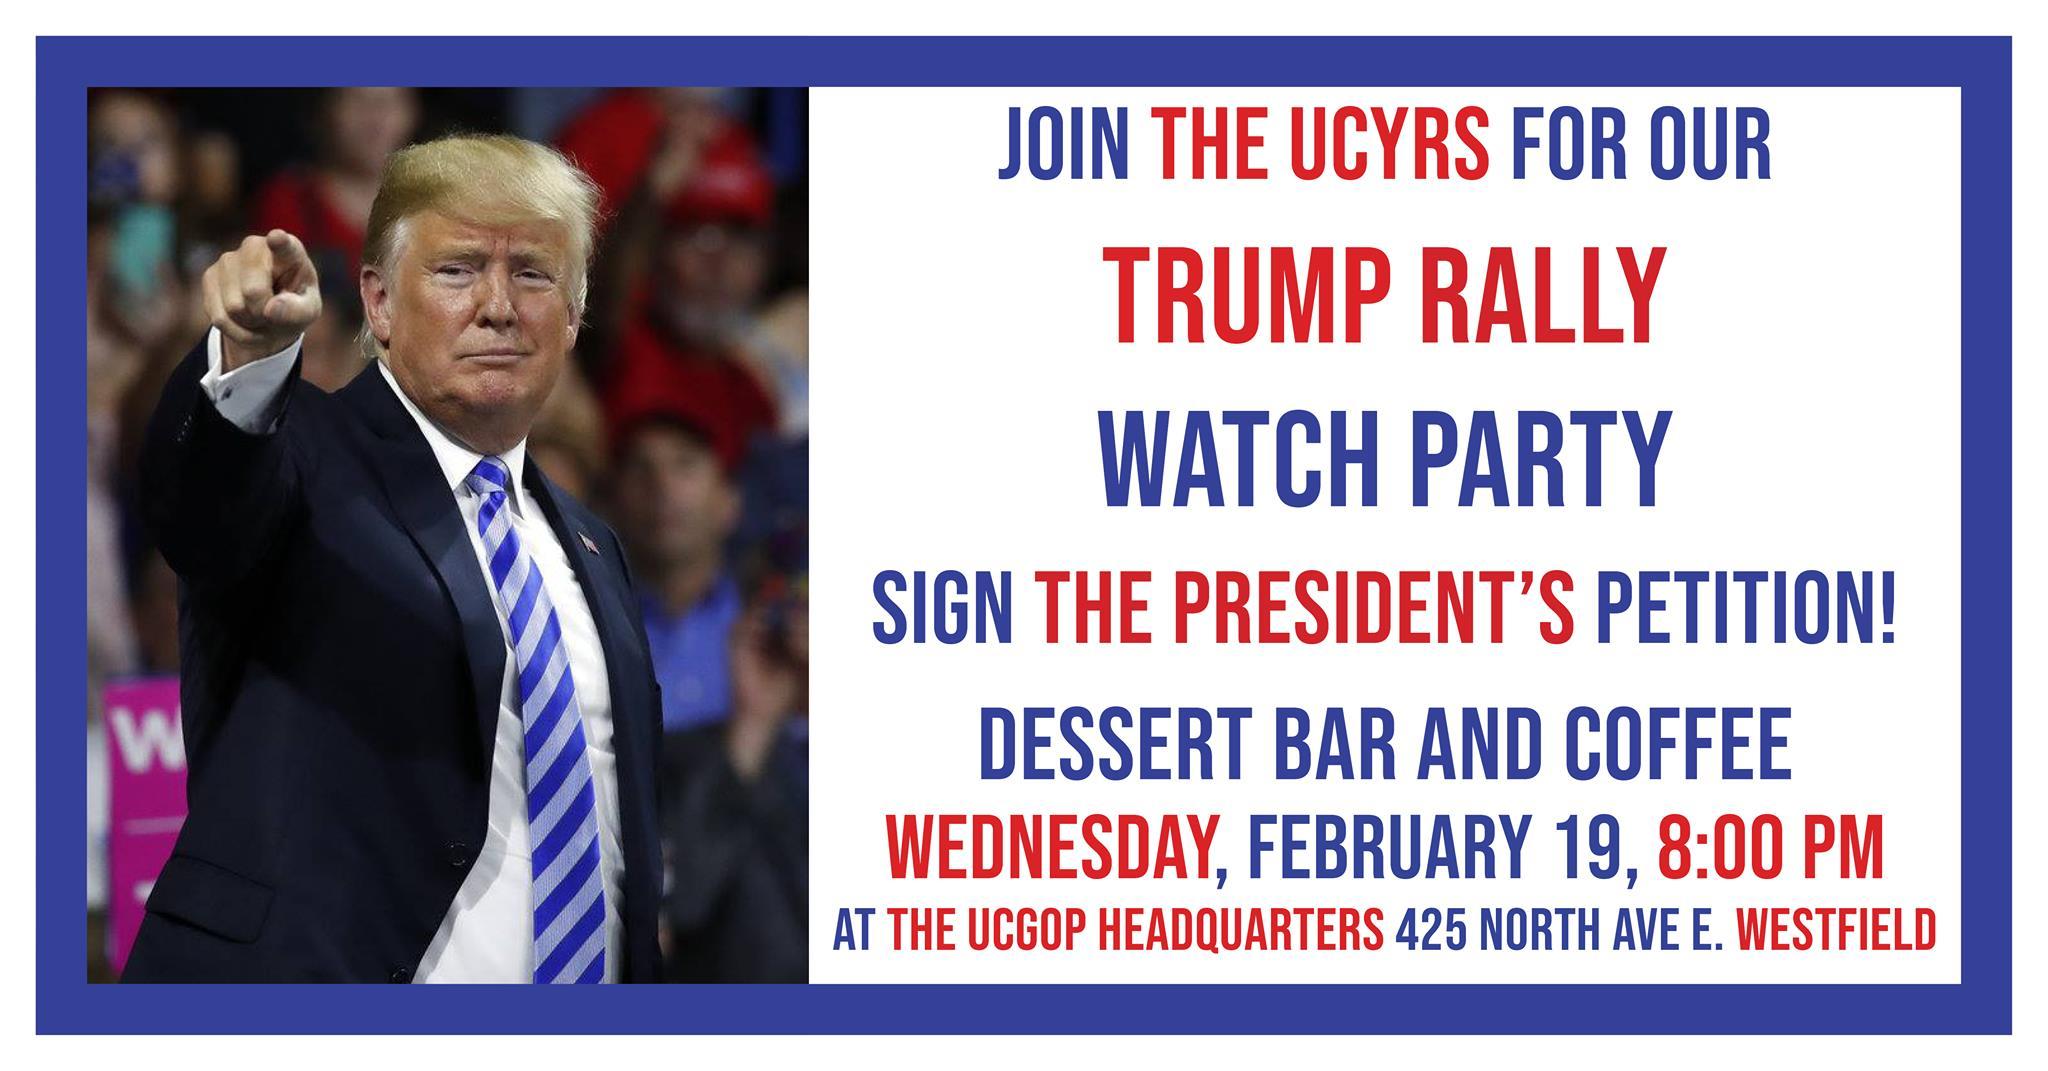 Trump Rally Watch Party, Petition Signing, and Dessert Bar